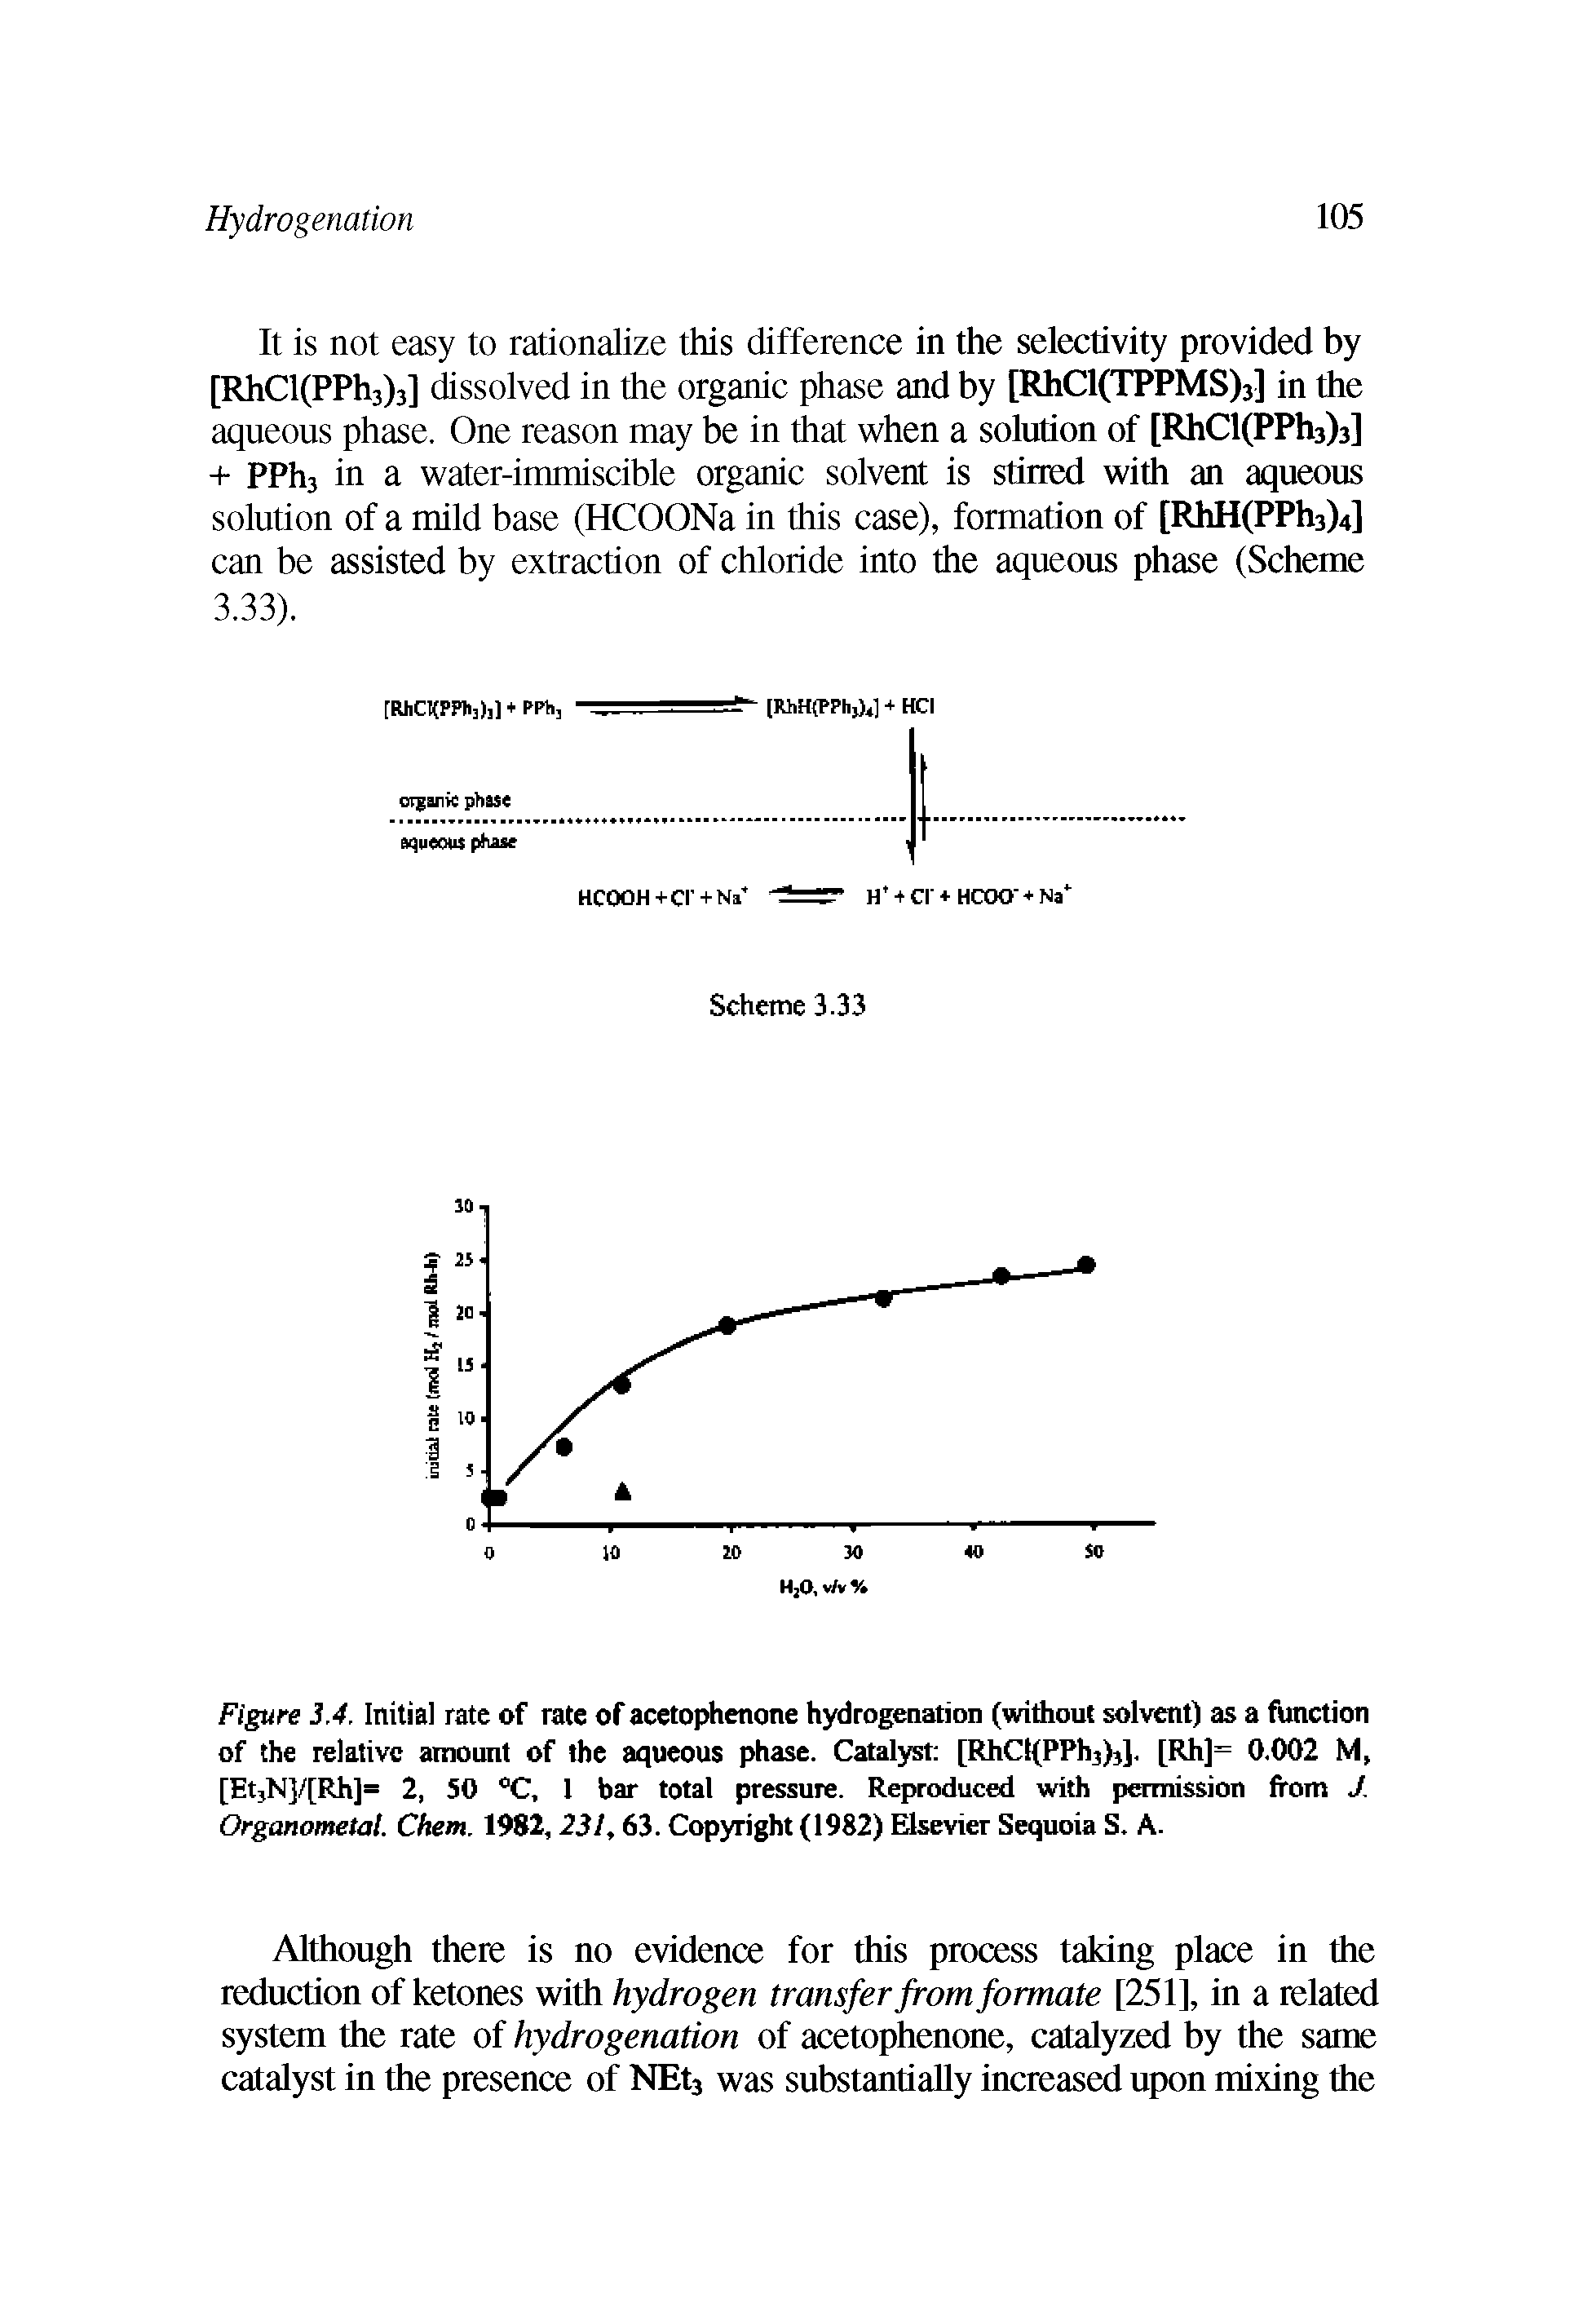 Figure 3.4. Initial rate of rate of acetophenone hydrogenation (without solvent) as a function of the relative amount of the aqueous phase. Catalyst [RhCt(PPh3)3]. [Rh]= 0.002 M, [EtjN]/[Rh]= 2, 50 °C, 1 bar total pressure. Reproduced with permission from J. Organometal. Chem. 1982, 231, 63. Copyright (1982) Elsevier Sequoia S. A.